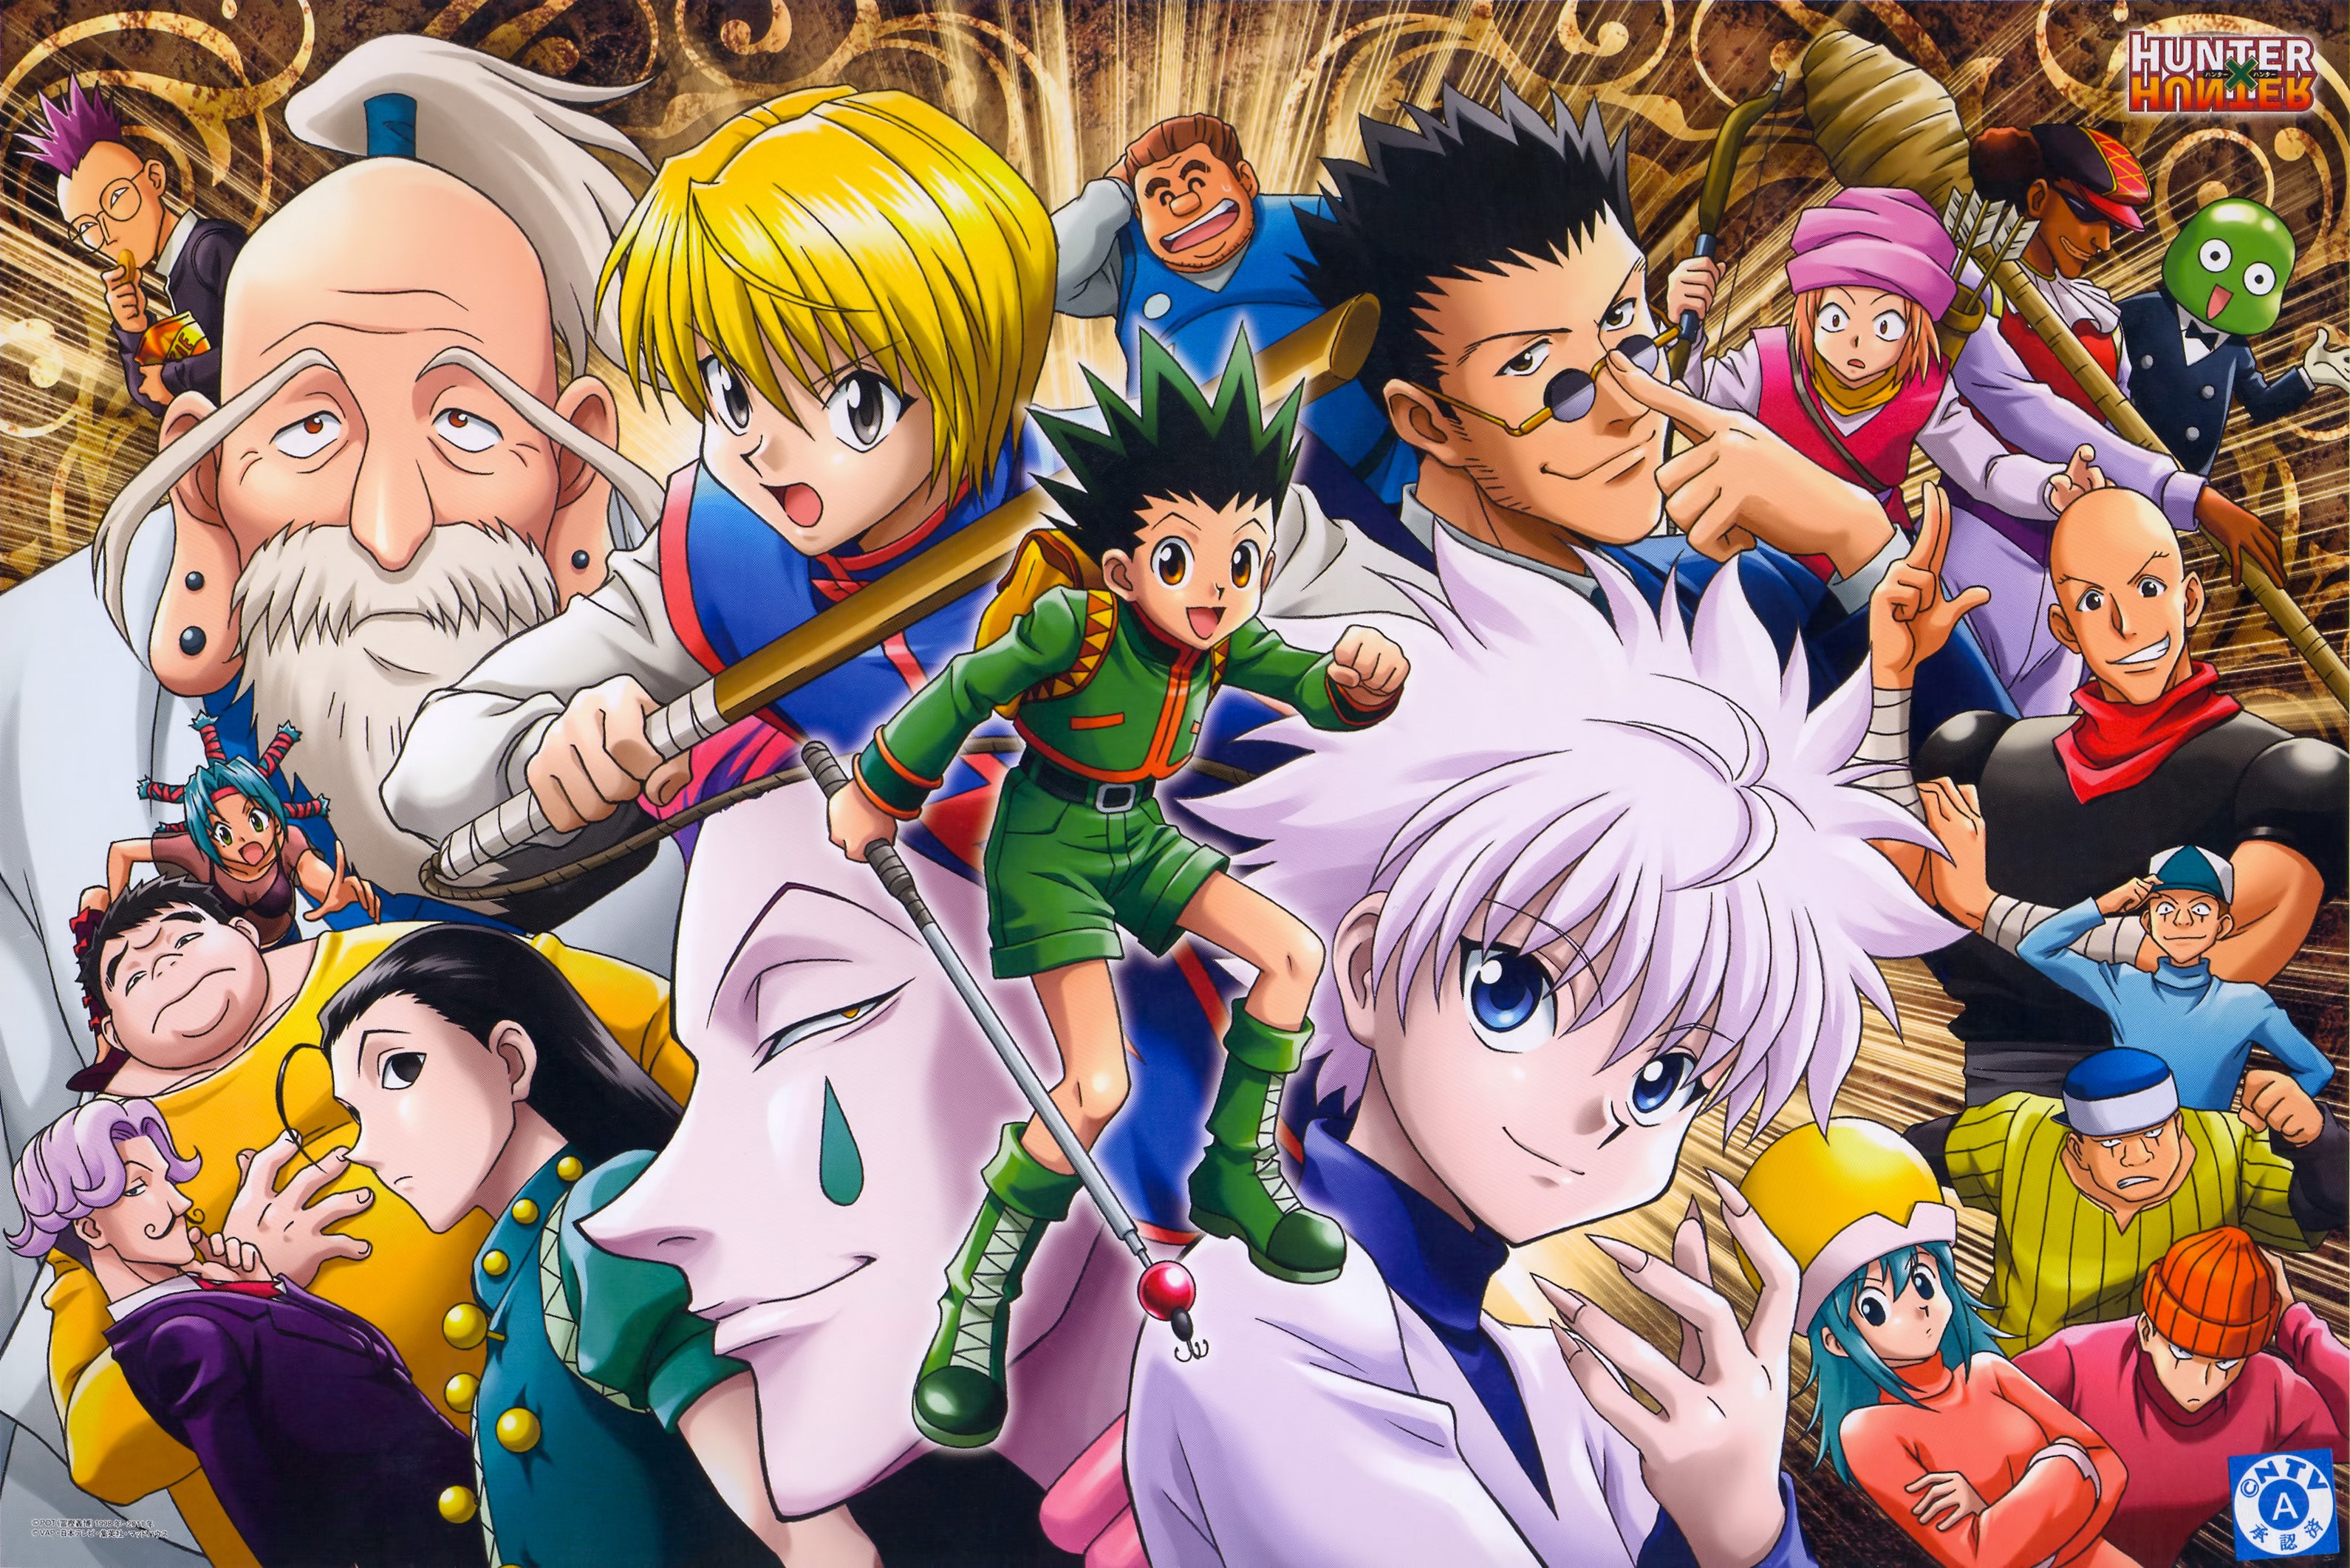 HUNTER X HUNTER ANIME WILL BE GETTING A NEW PROTAGONIST